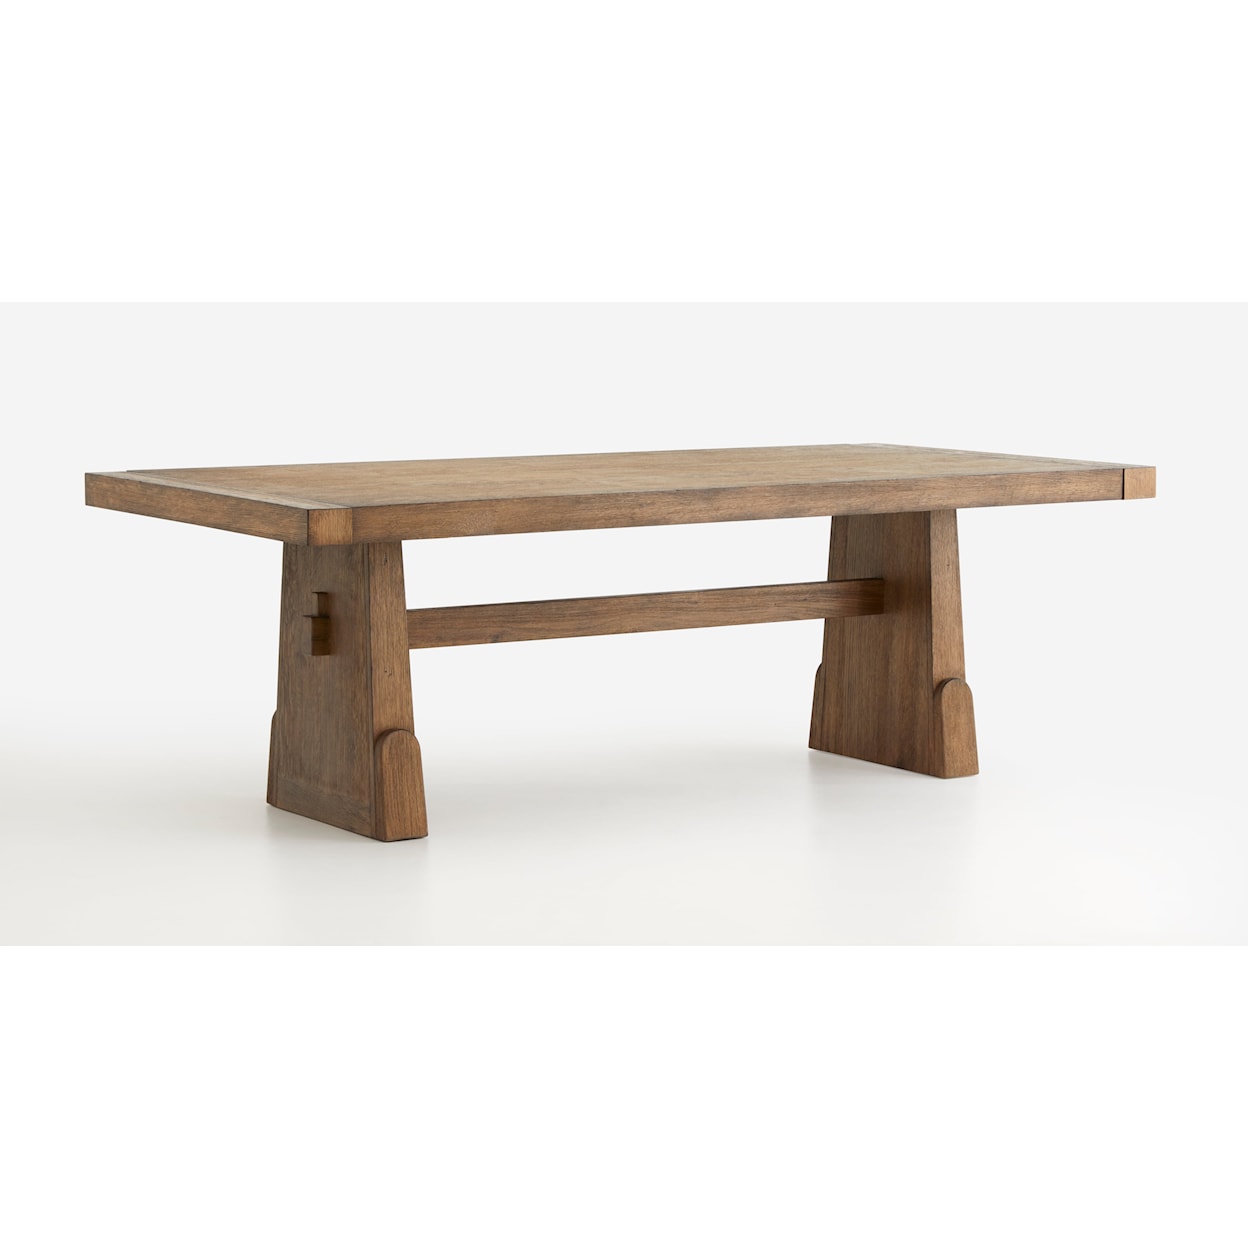 The Preserve Sugarland Dining Table